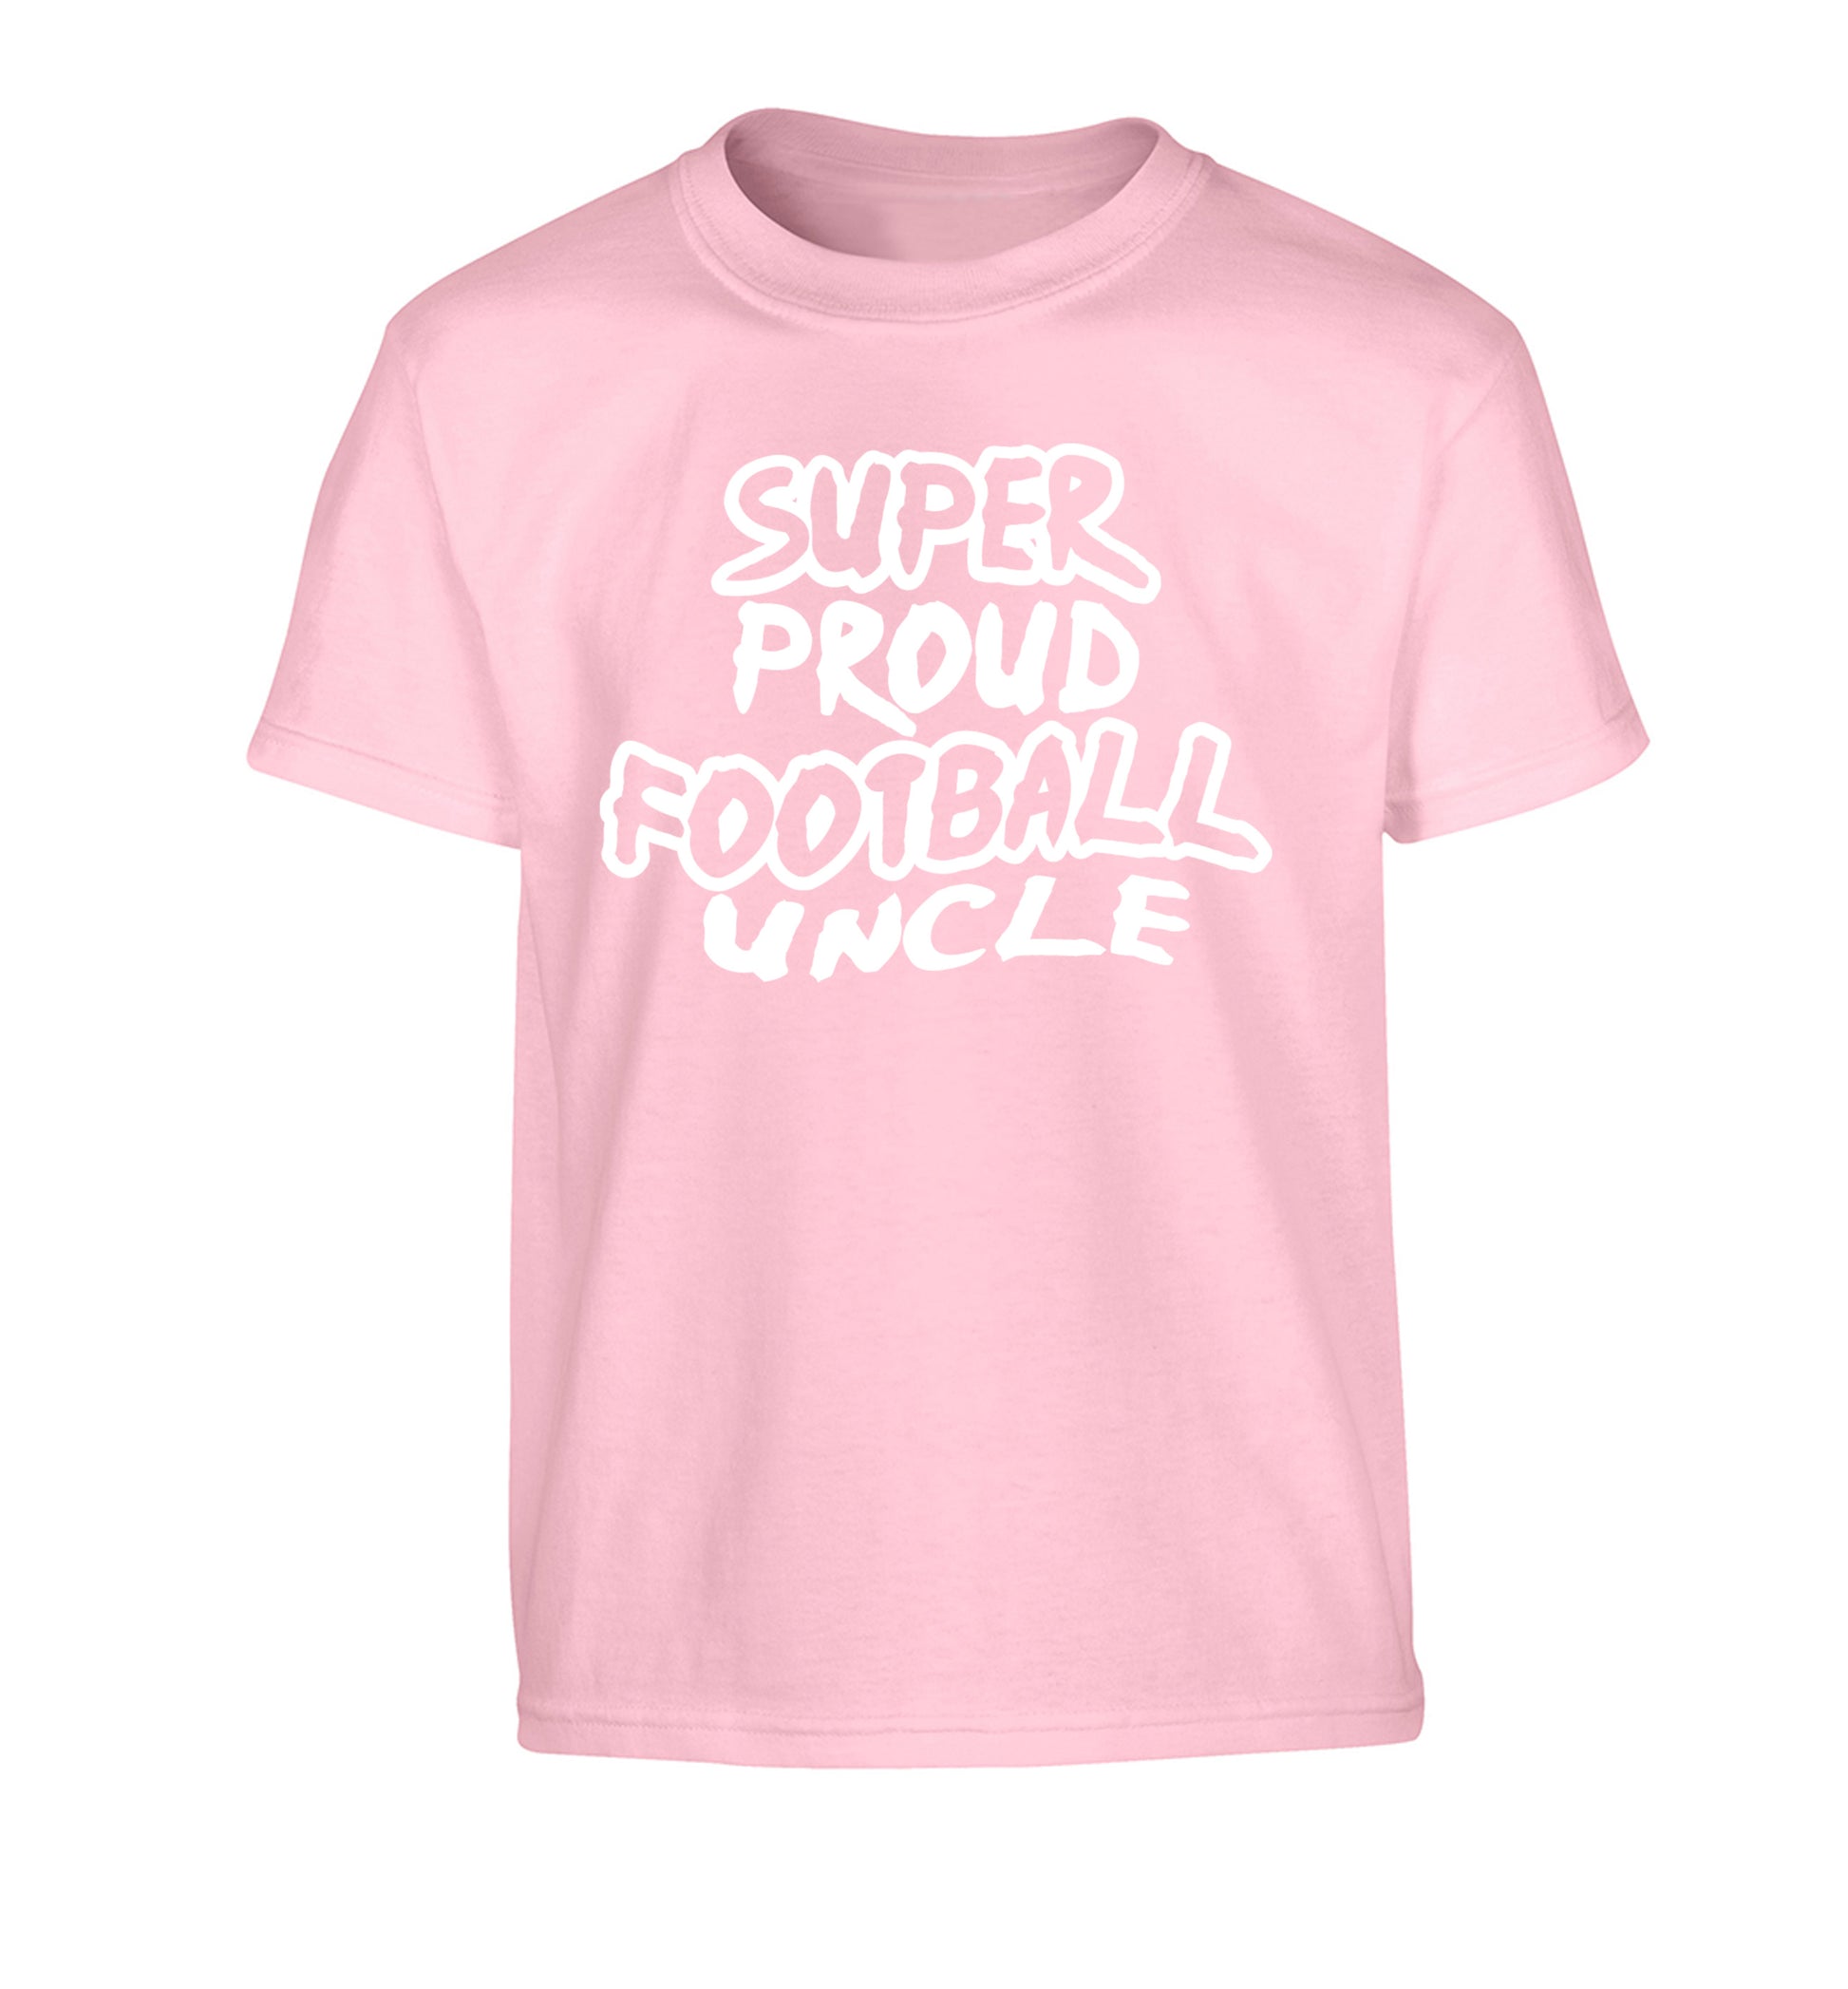 Super proud football uncle Children's light pink Tshirt 12-14 Years